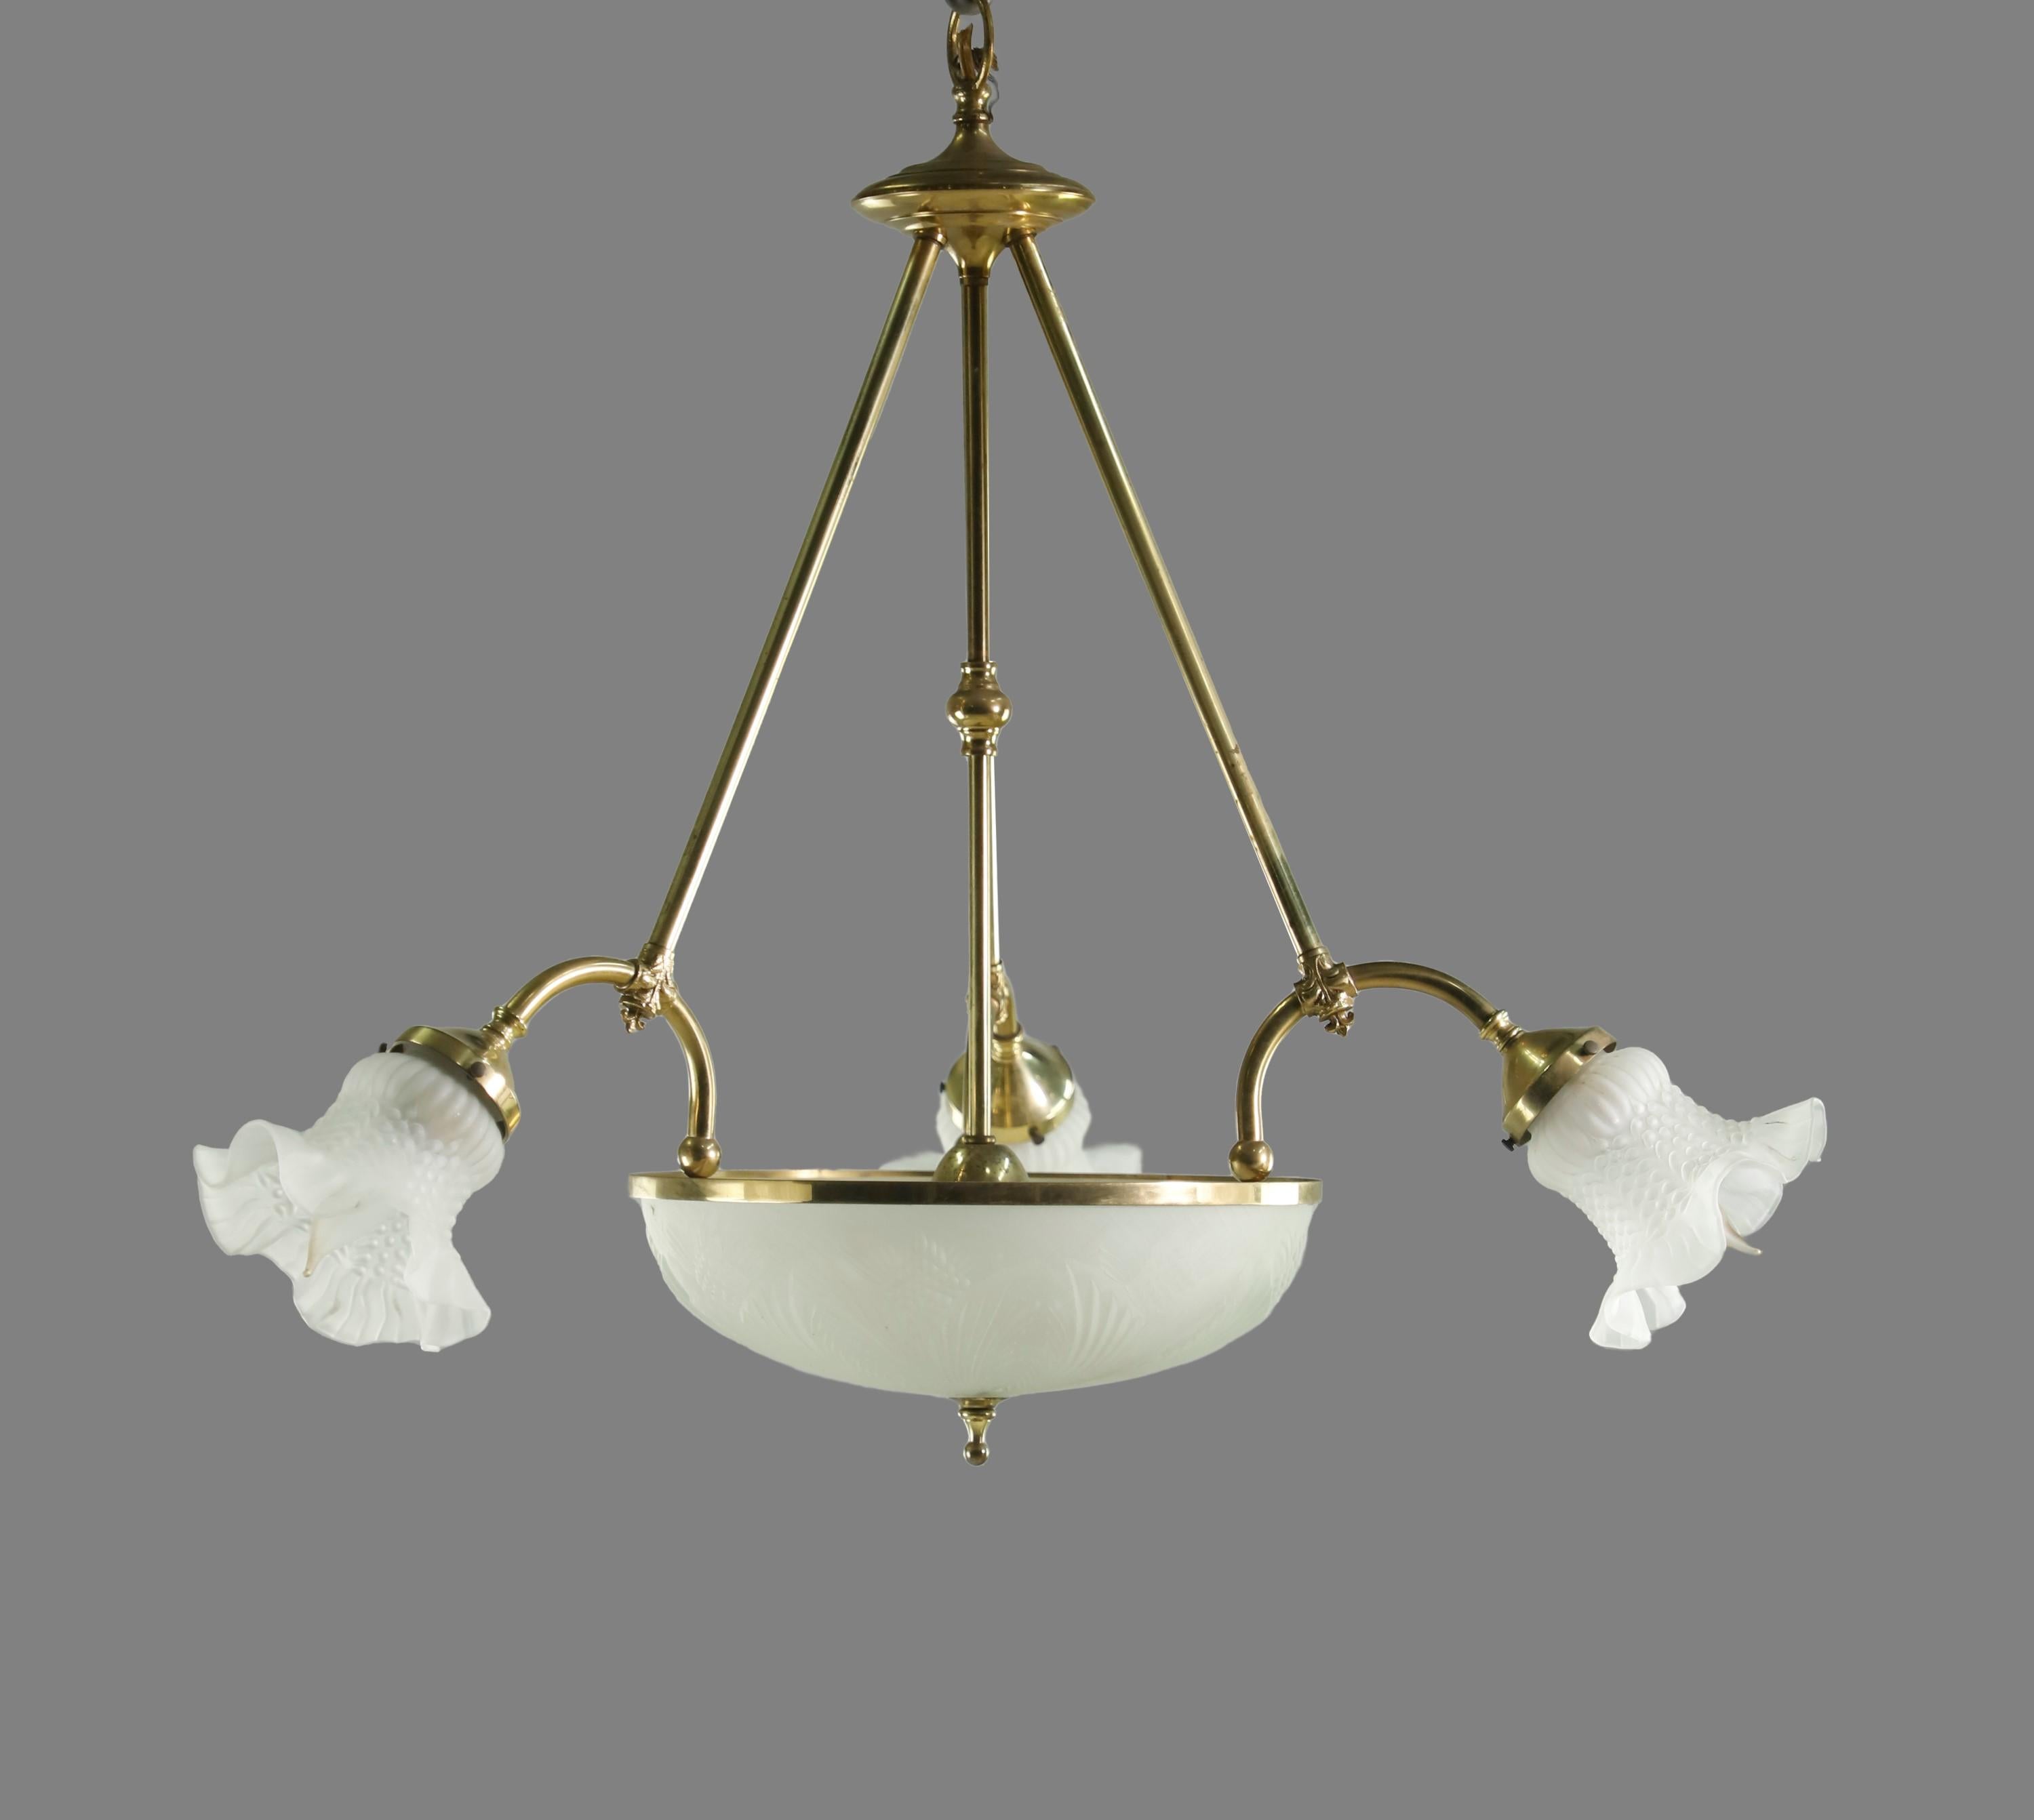 20th century pendant light in brass. Features 3 outstretched arms and one center dish. 5 sockets total, 3 candelabra Size in the arms and 2 base medium base Size in the center dish. Molded floral shades and dish. This will be cleaned and restored